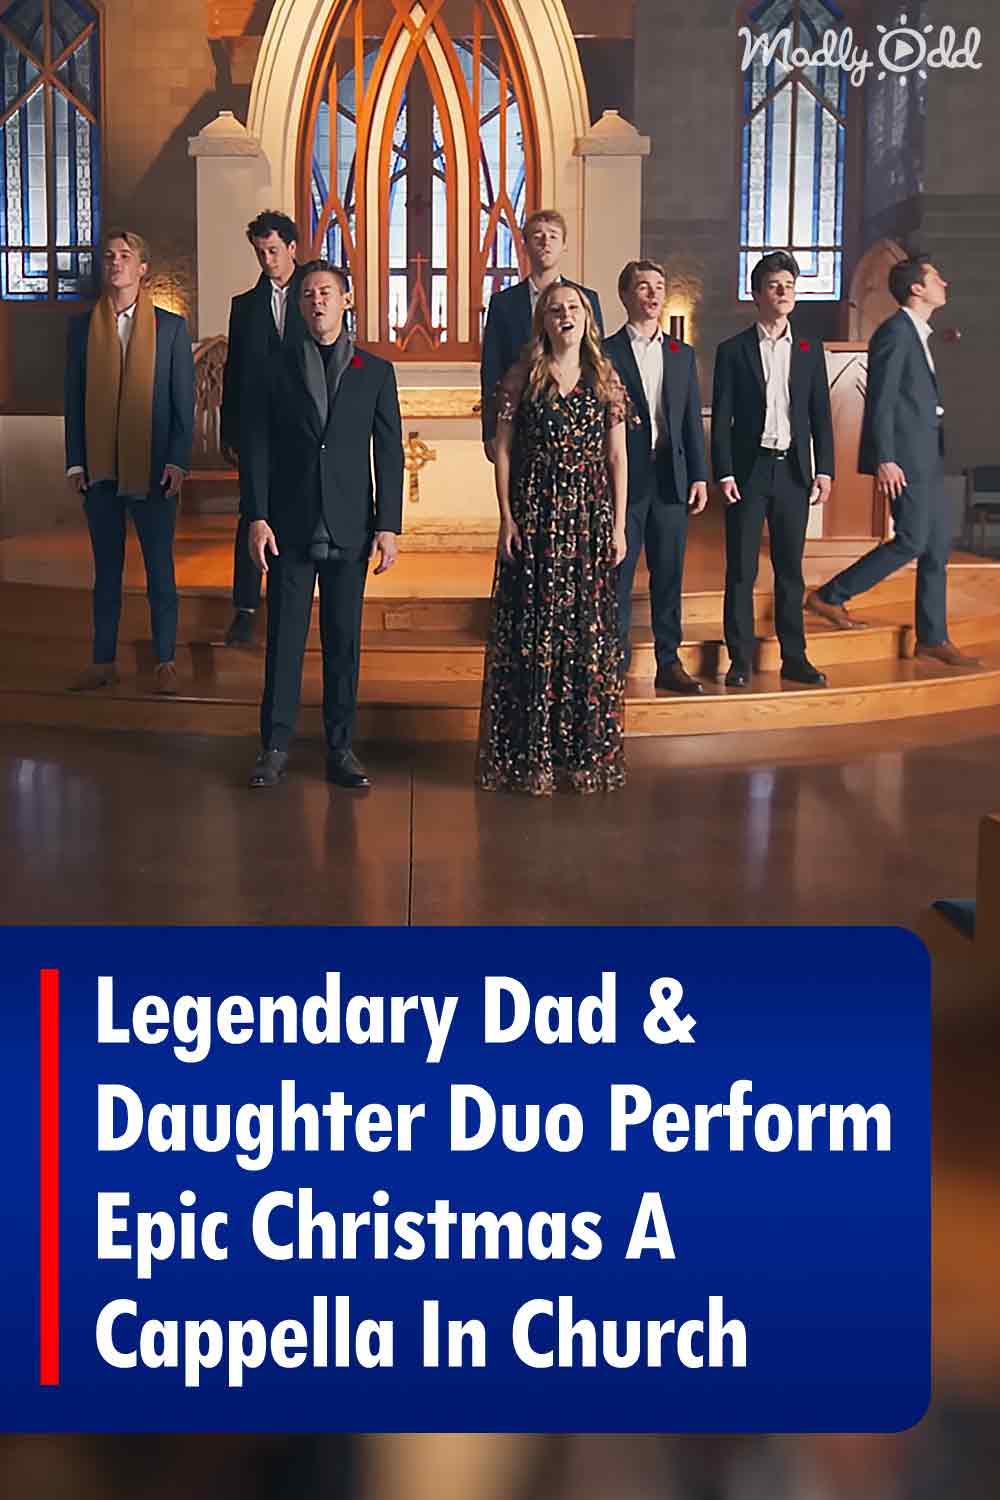 Legendary Dad & Daughter Duo Perform Epic Christmas A Cappella In Church